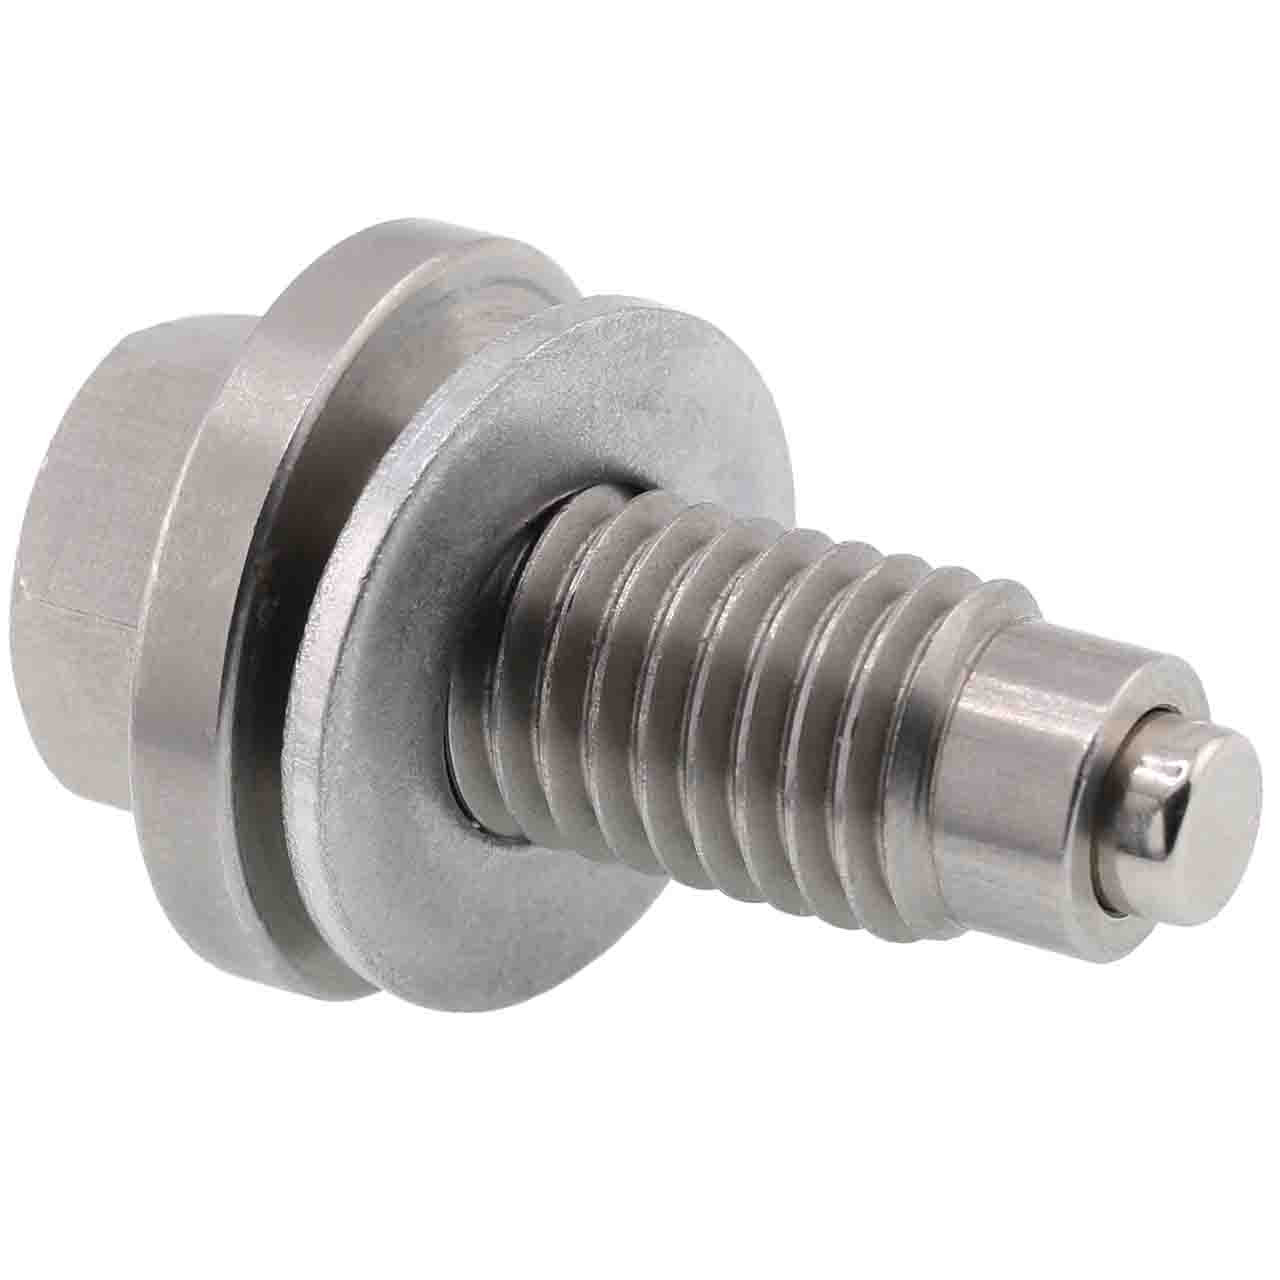 GMC Sierra 2500 Magnetic Oil Drain Plug - 2020-2024 - 6.6 Liter Gas - 8 Cylinder - Made In USA - Stainless Steel - Part Number 55577568